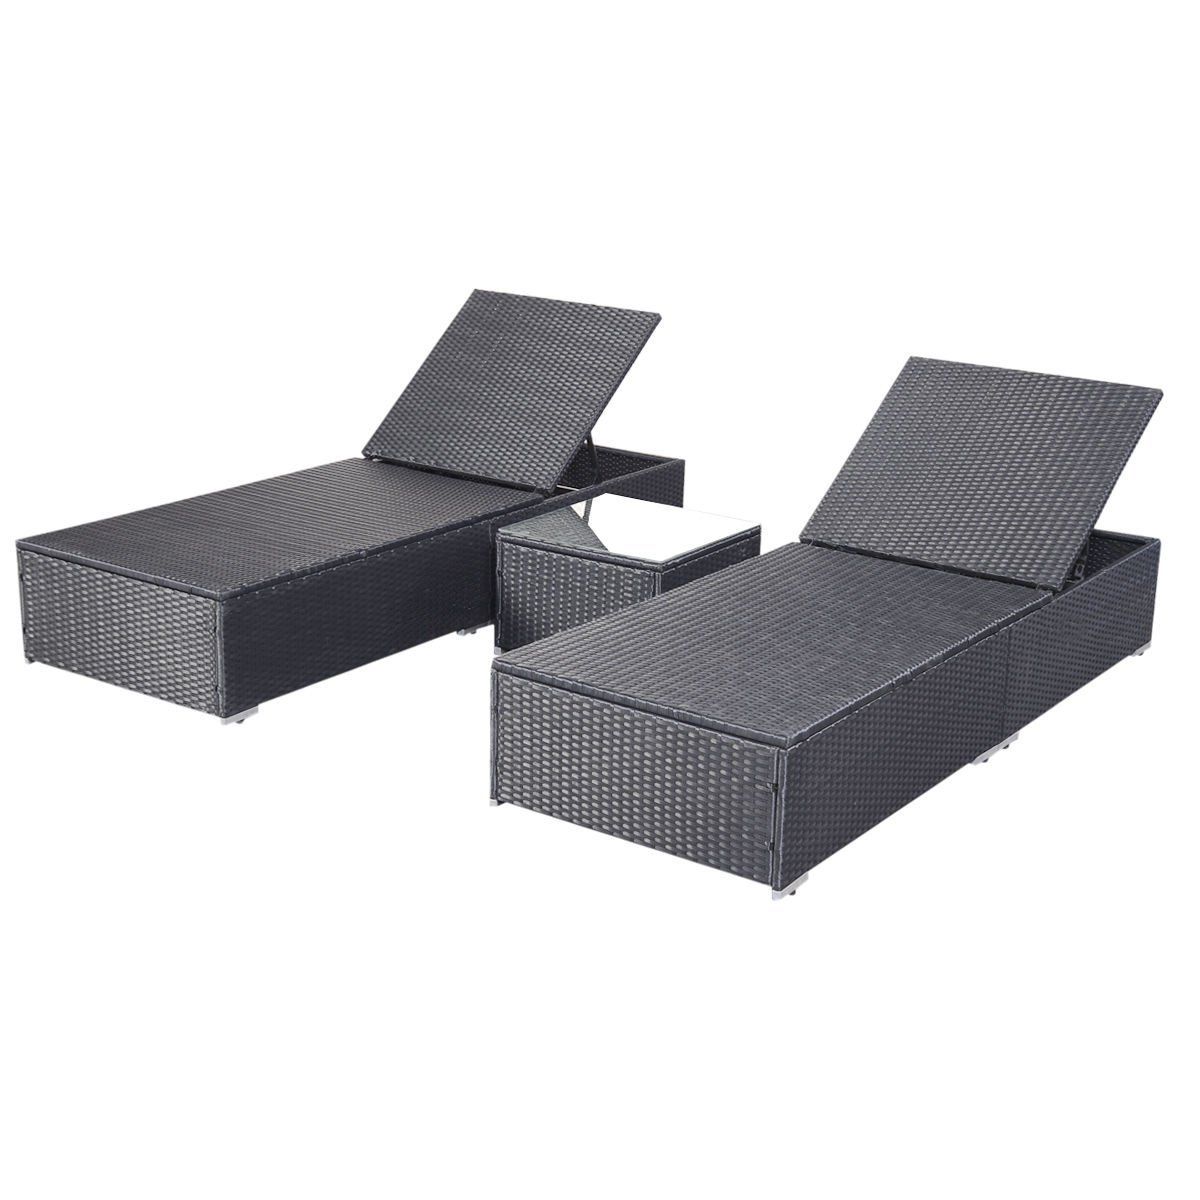 Favorite Target Outdoor Chaise Lounges Within Outdoor : Target Lounge Chairs Vinyl Strap Chaise Lounge Outdoor (View 15 of 15)